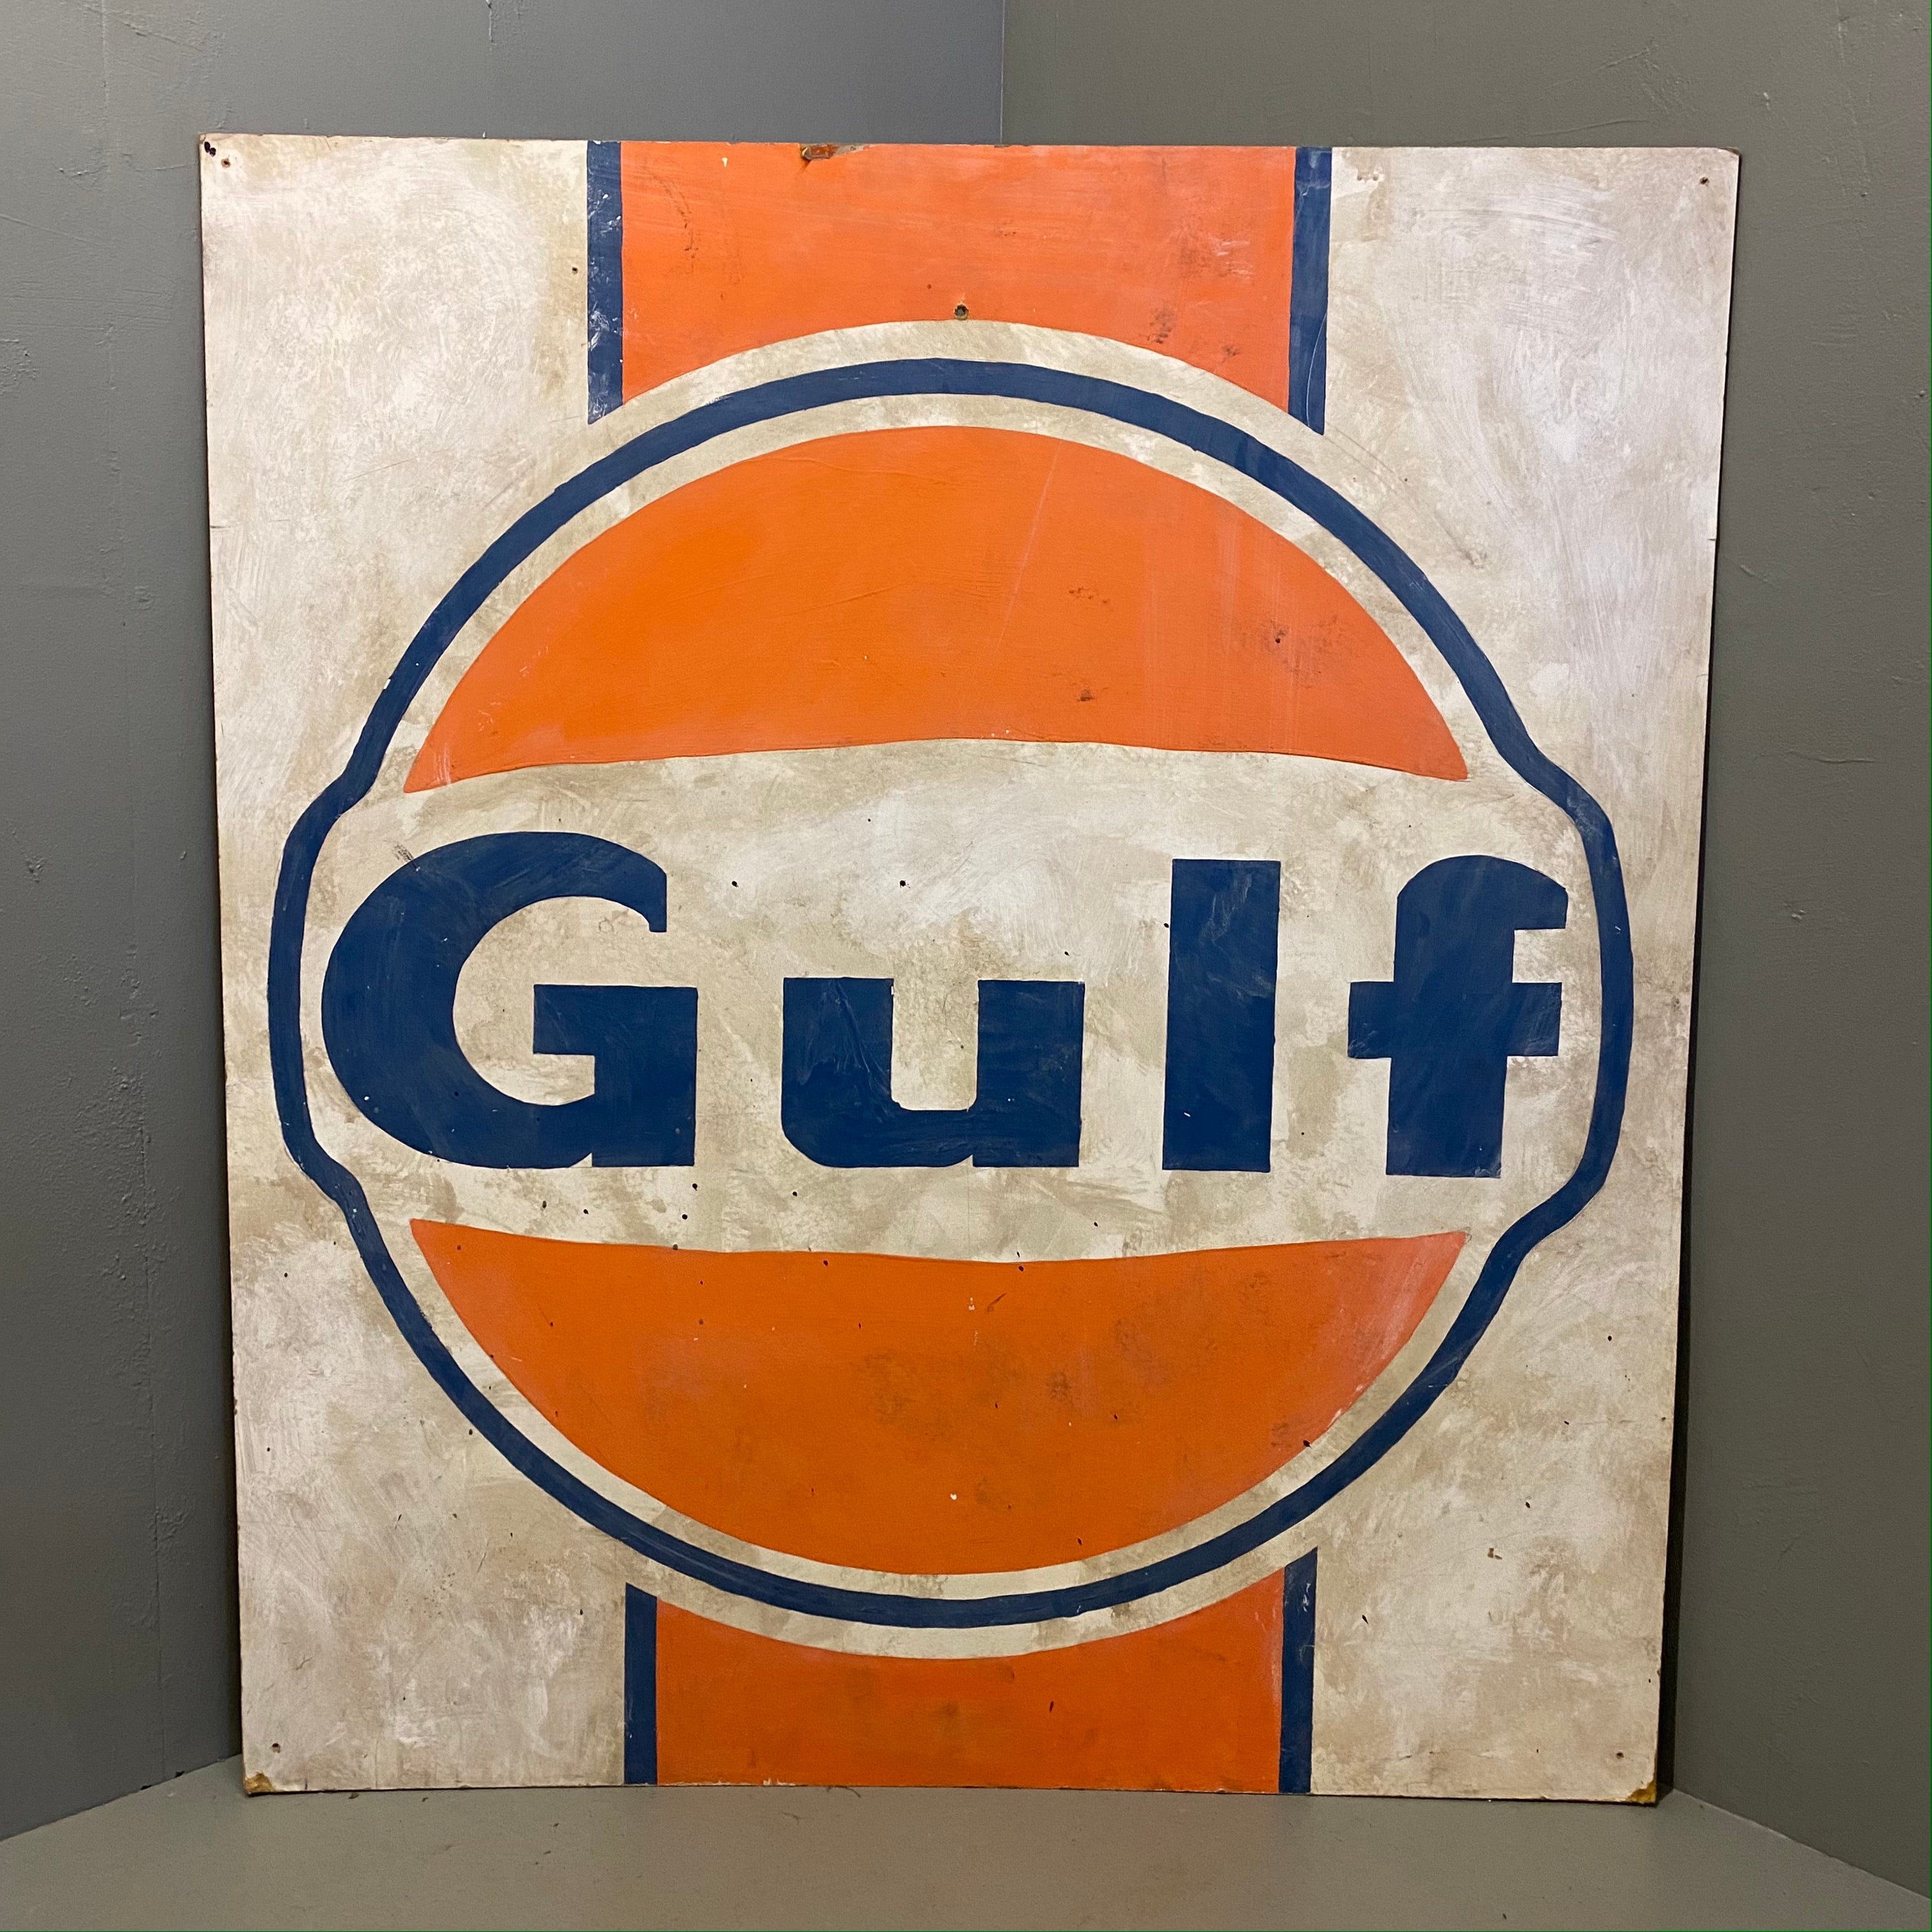 Vintage Hand painted Sign Gulf Art